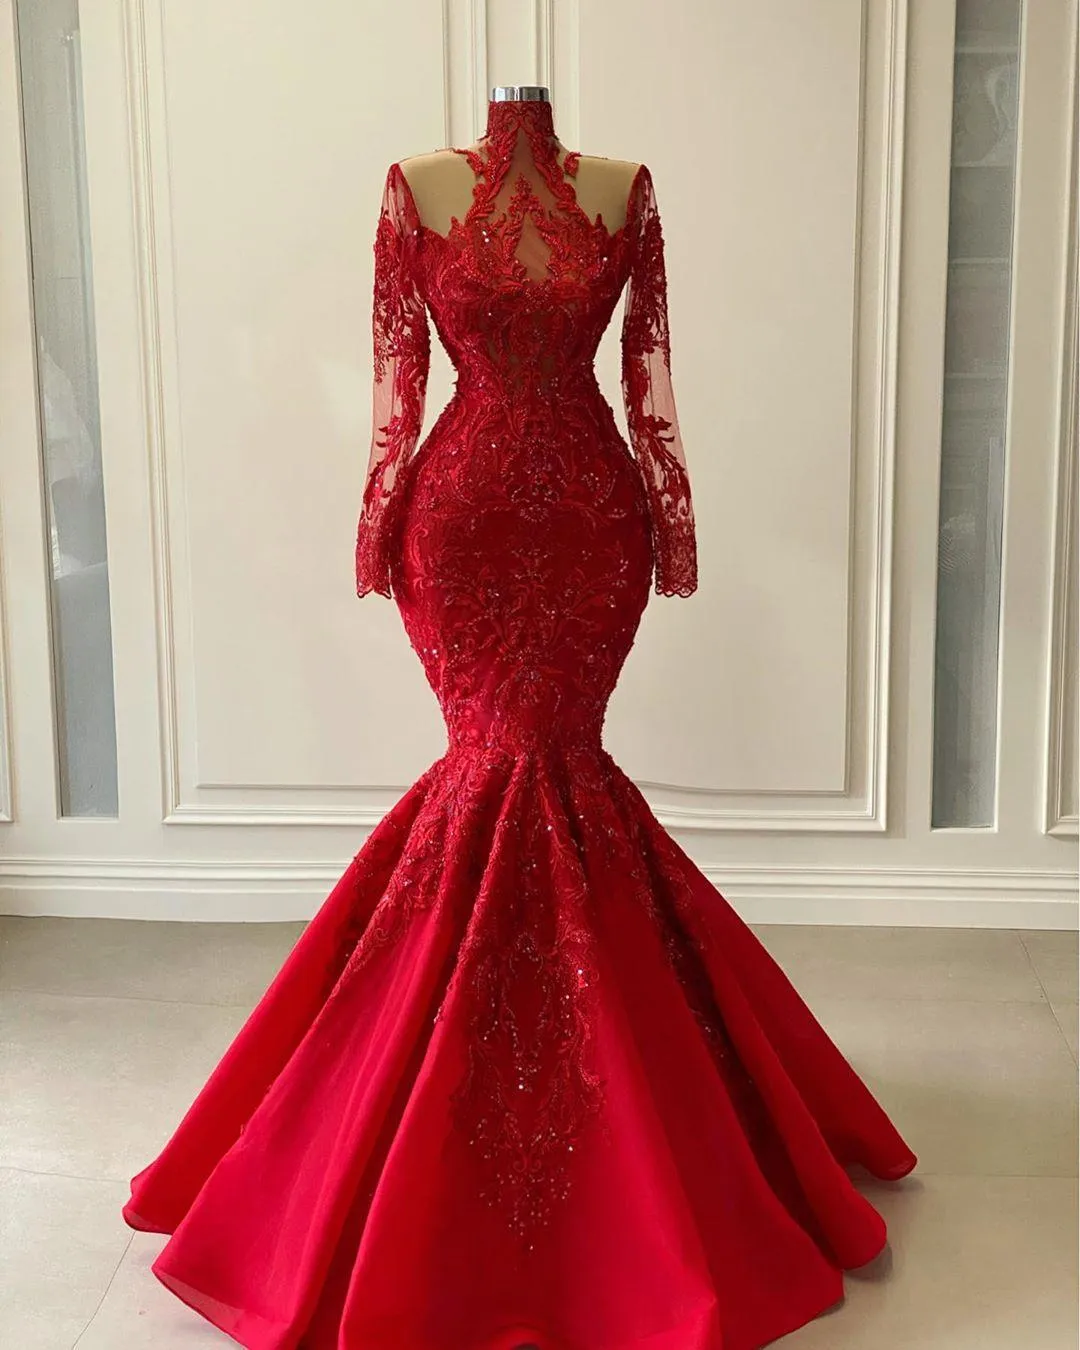 2021 Sexy Arabic Aso Ebi Red Luxurious Lace Crystal Beaded Prom Dresses Shiny Long Sleeves High Neck Illusion Mermaid Evening Gowns Vestidos